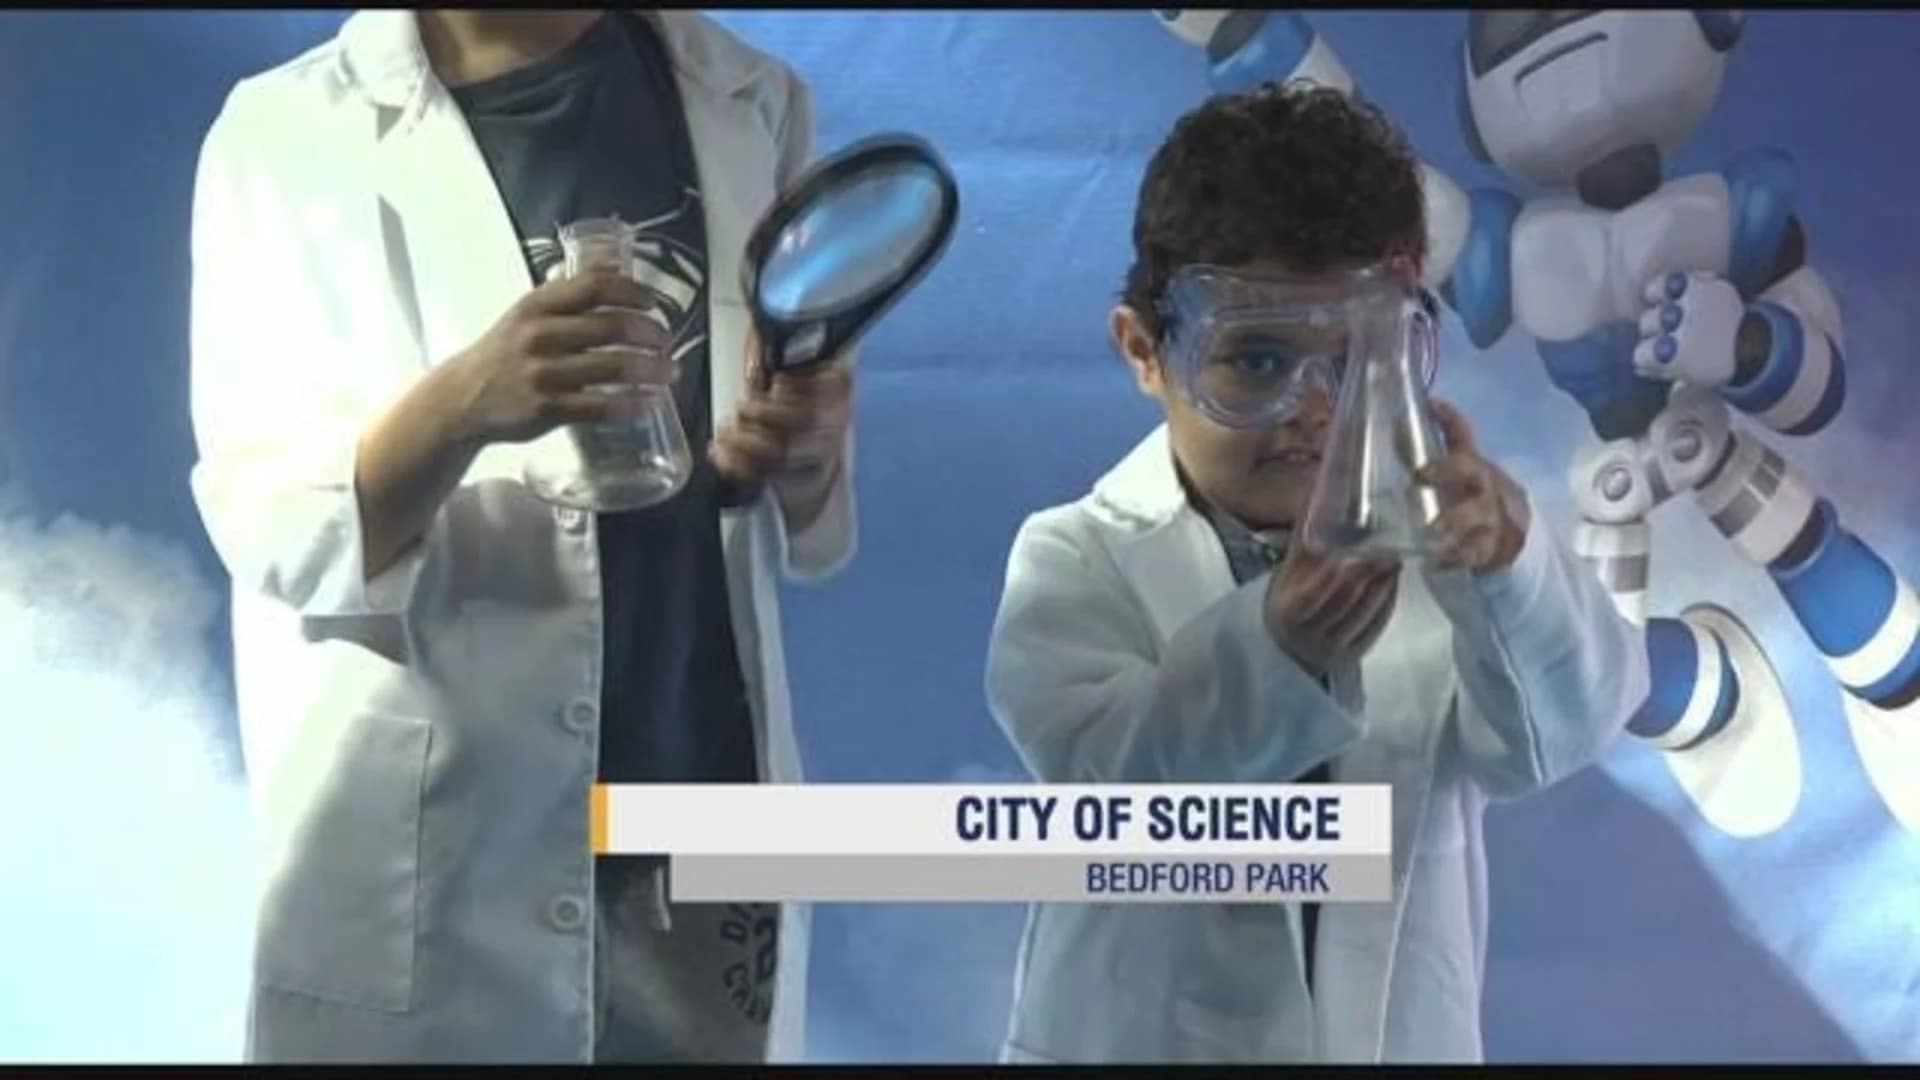 Lehman College plays host to annual City of Science event